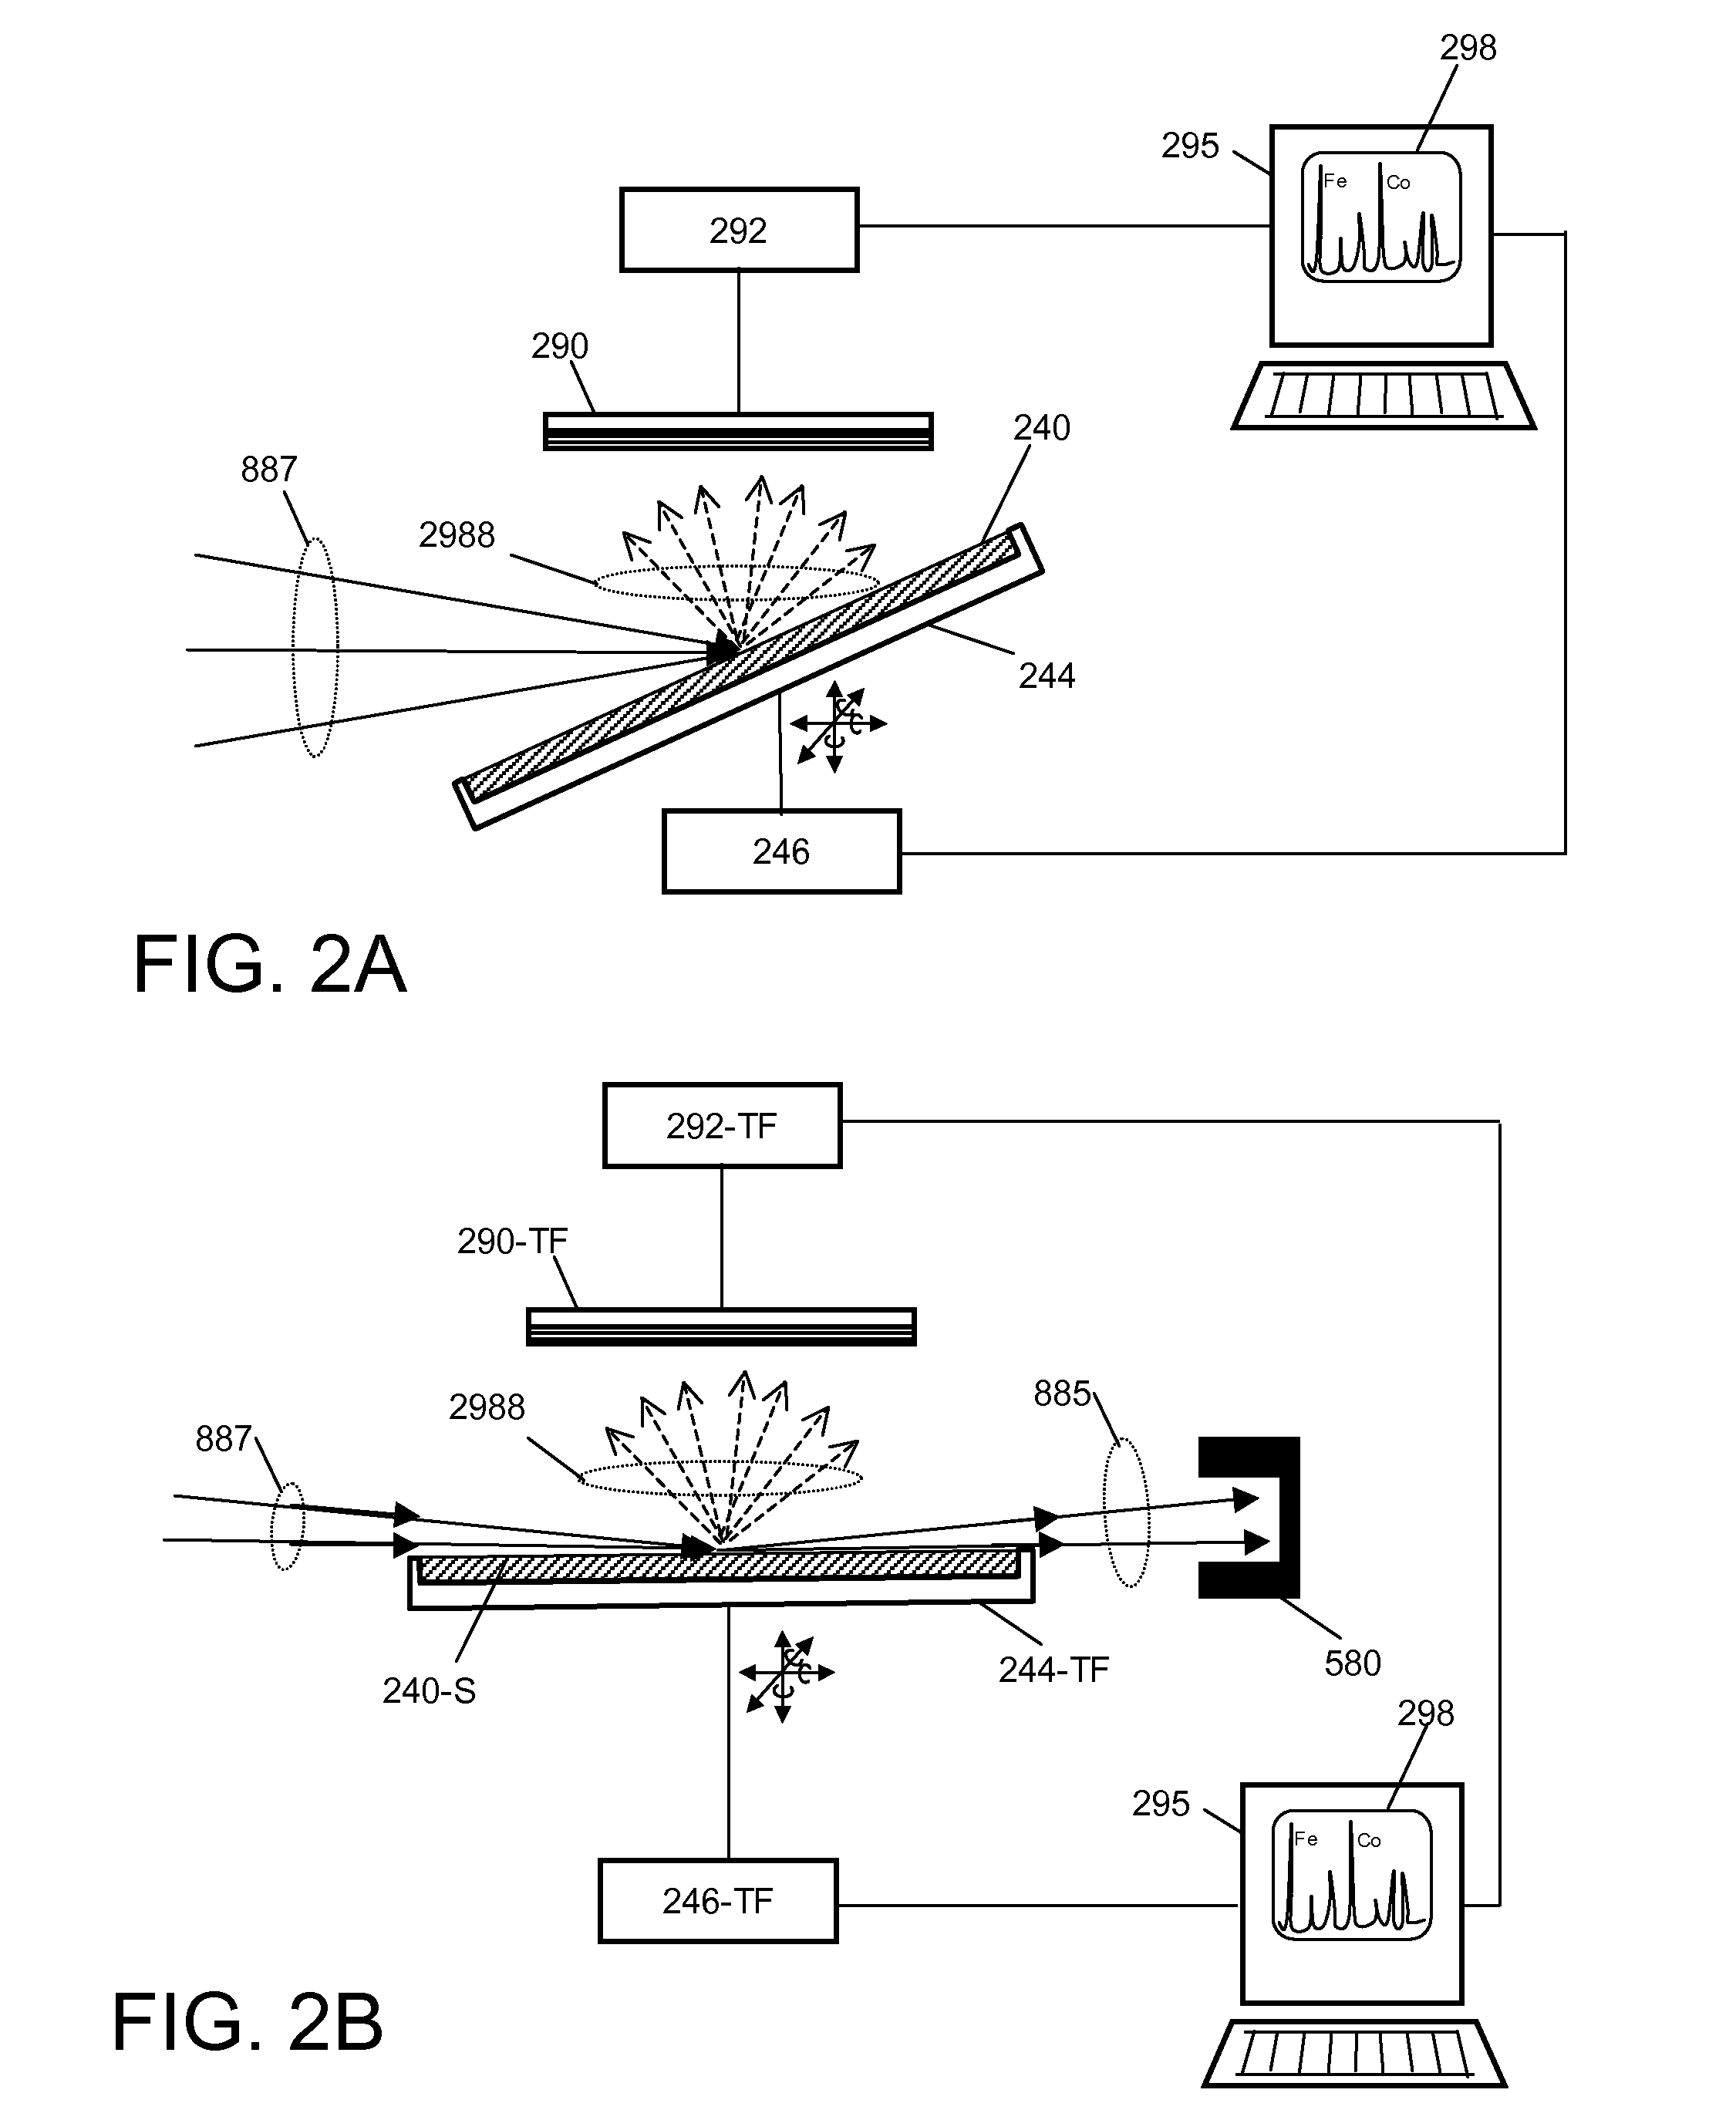 X-ray surface analysis and measurement apparatus